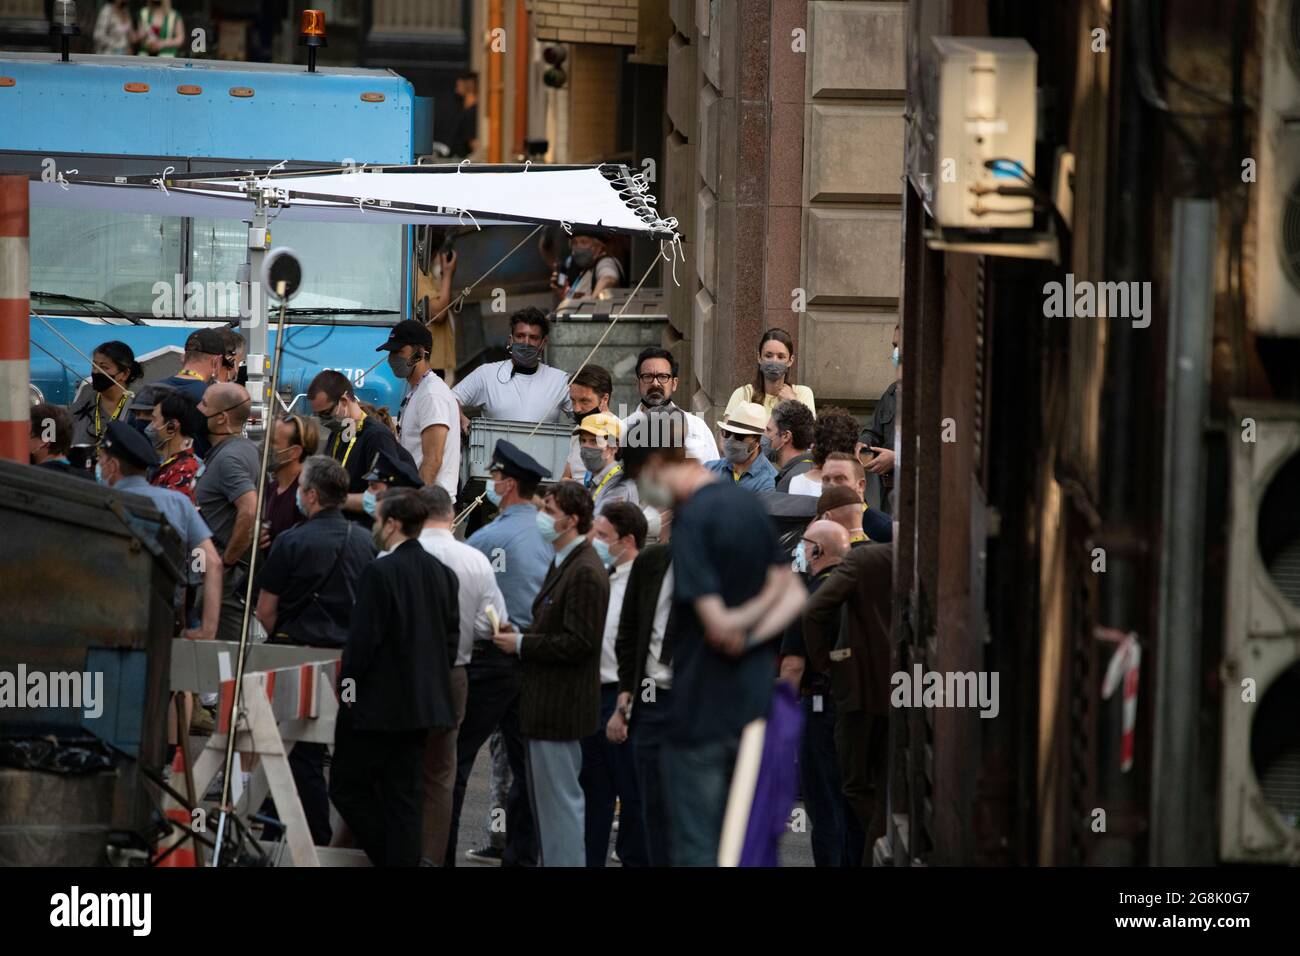 Glasgow, Scotland, UK. 20 July 2021.  PICTURED: Cast members seen in between takes on and off film set. Filming on the set of Indiana Jones 5 in the middle of Glasgow city centre as the Hollywood blockbuster sets up Glasgow as New York City. A full production can be seen, with a large cast, producers and extras. The city centre has been changed so that all the shop fronts and building look like 1959 America. Credit: Colin Fisher Stock Photo